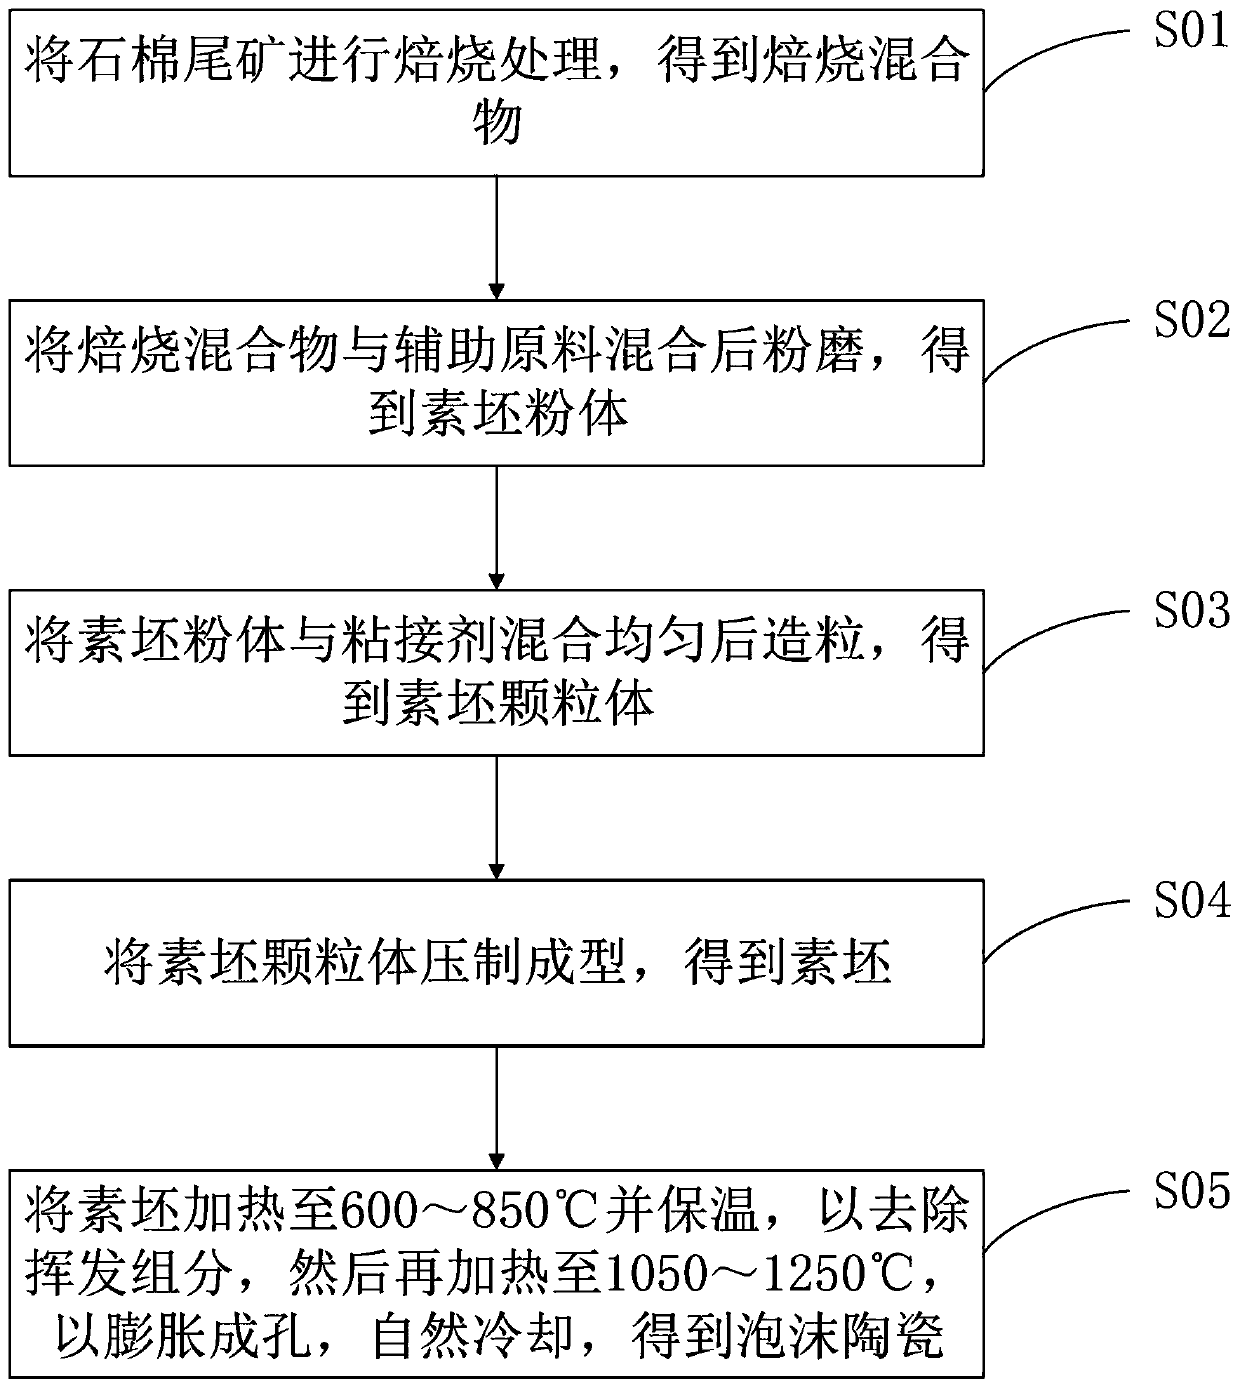 Method for preparing CaO-MgO-SiO2 series foamed ceramic by utilizing asbestos tailings